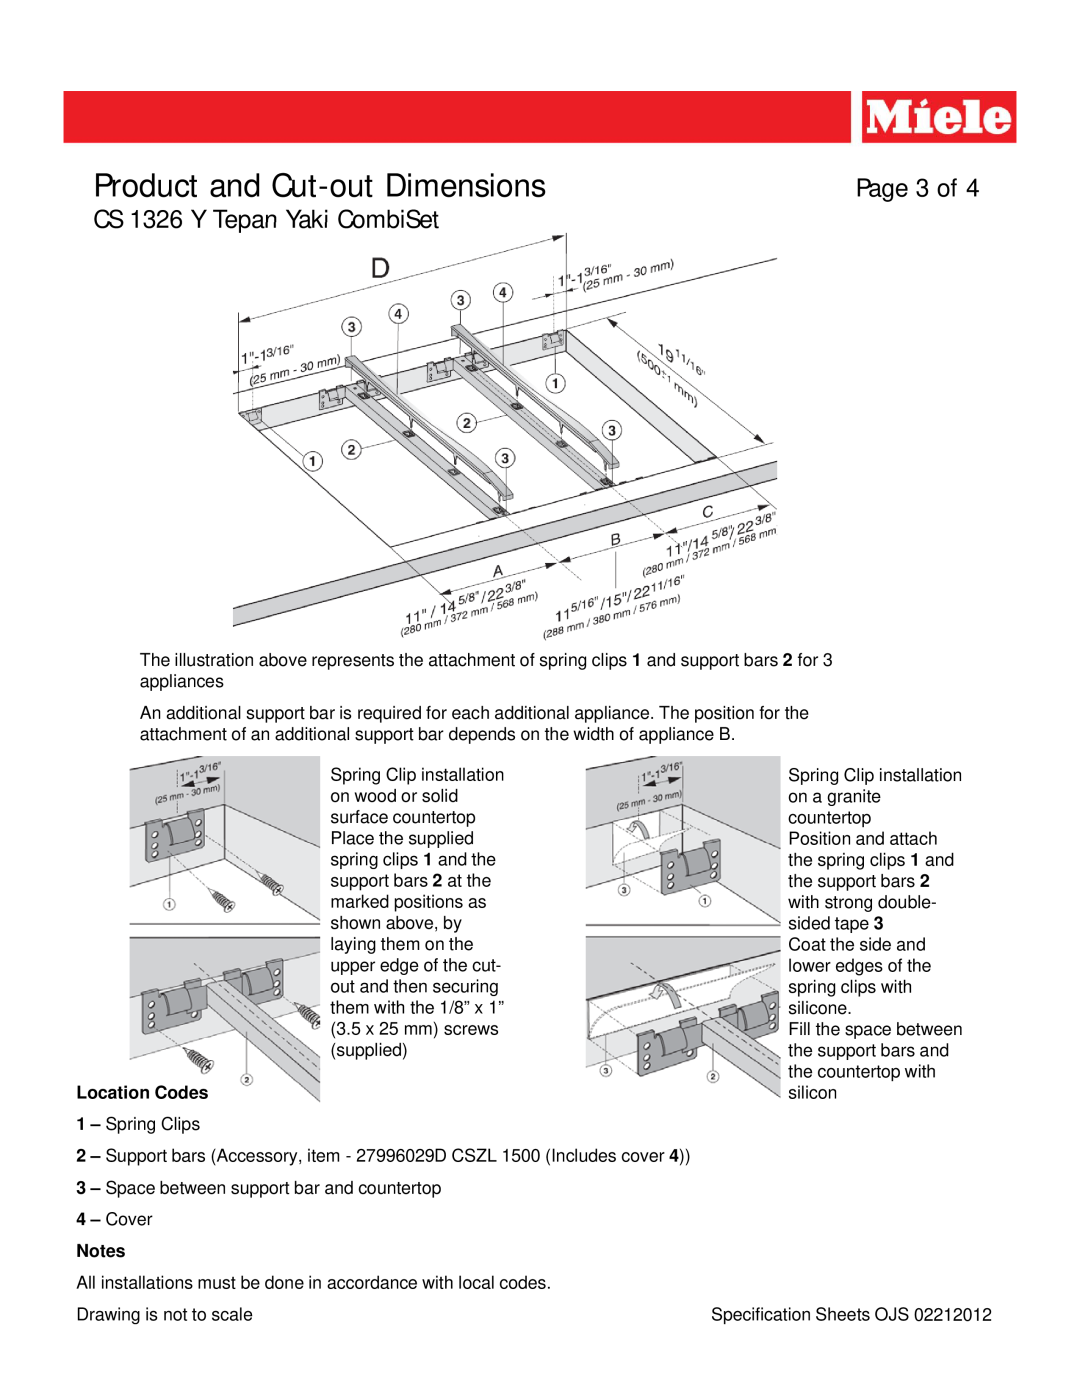 Miele dimensions Page 3 of, Location Codes, Product and Cut-outDimensions, CS 1326 Y Tepan Yaki CombiSet 